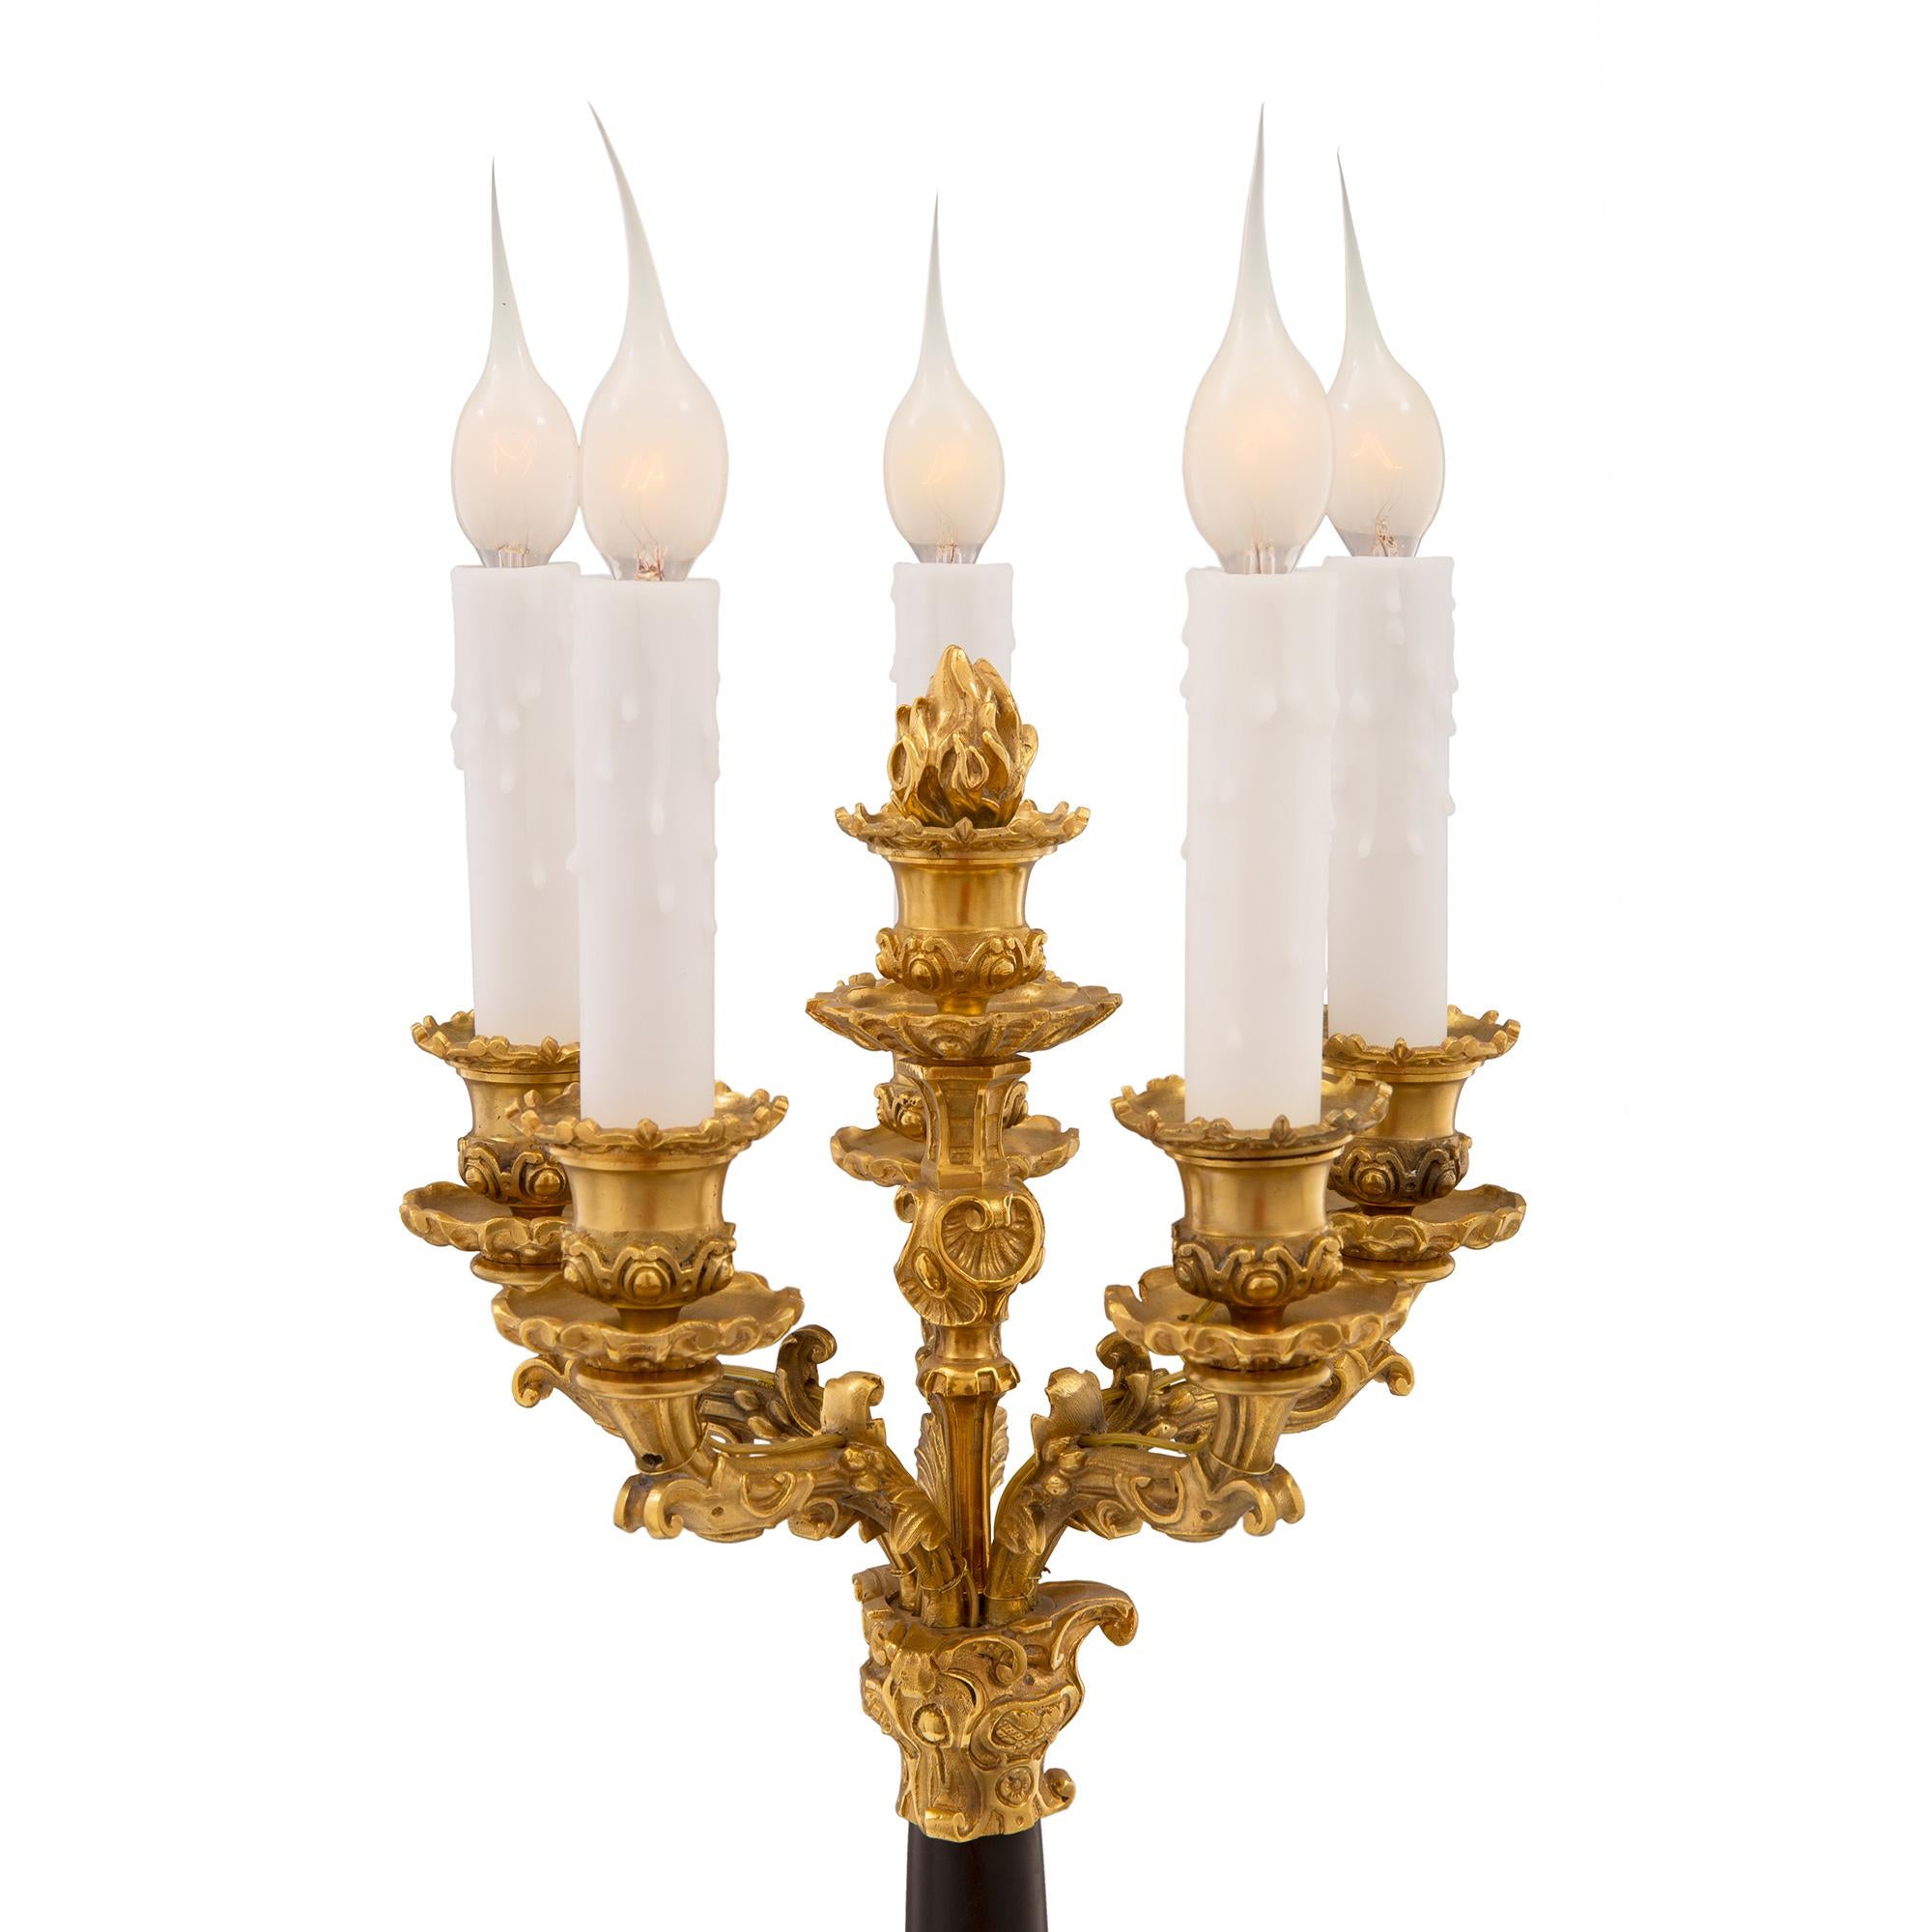 Patinated Pair of French Mid-19th Century Neoclassical Bronze, Ormolu and Marble Lamps For Sale